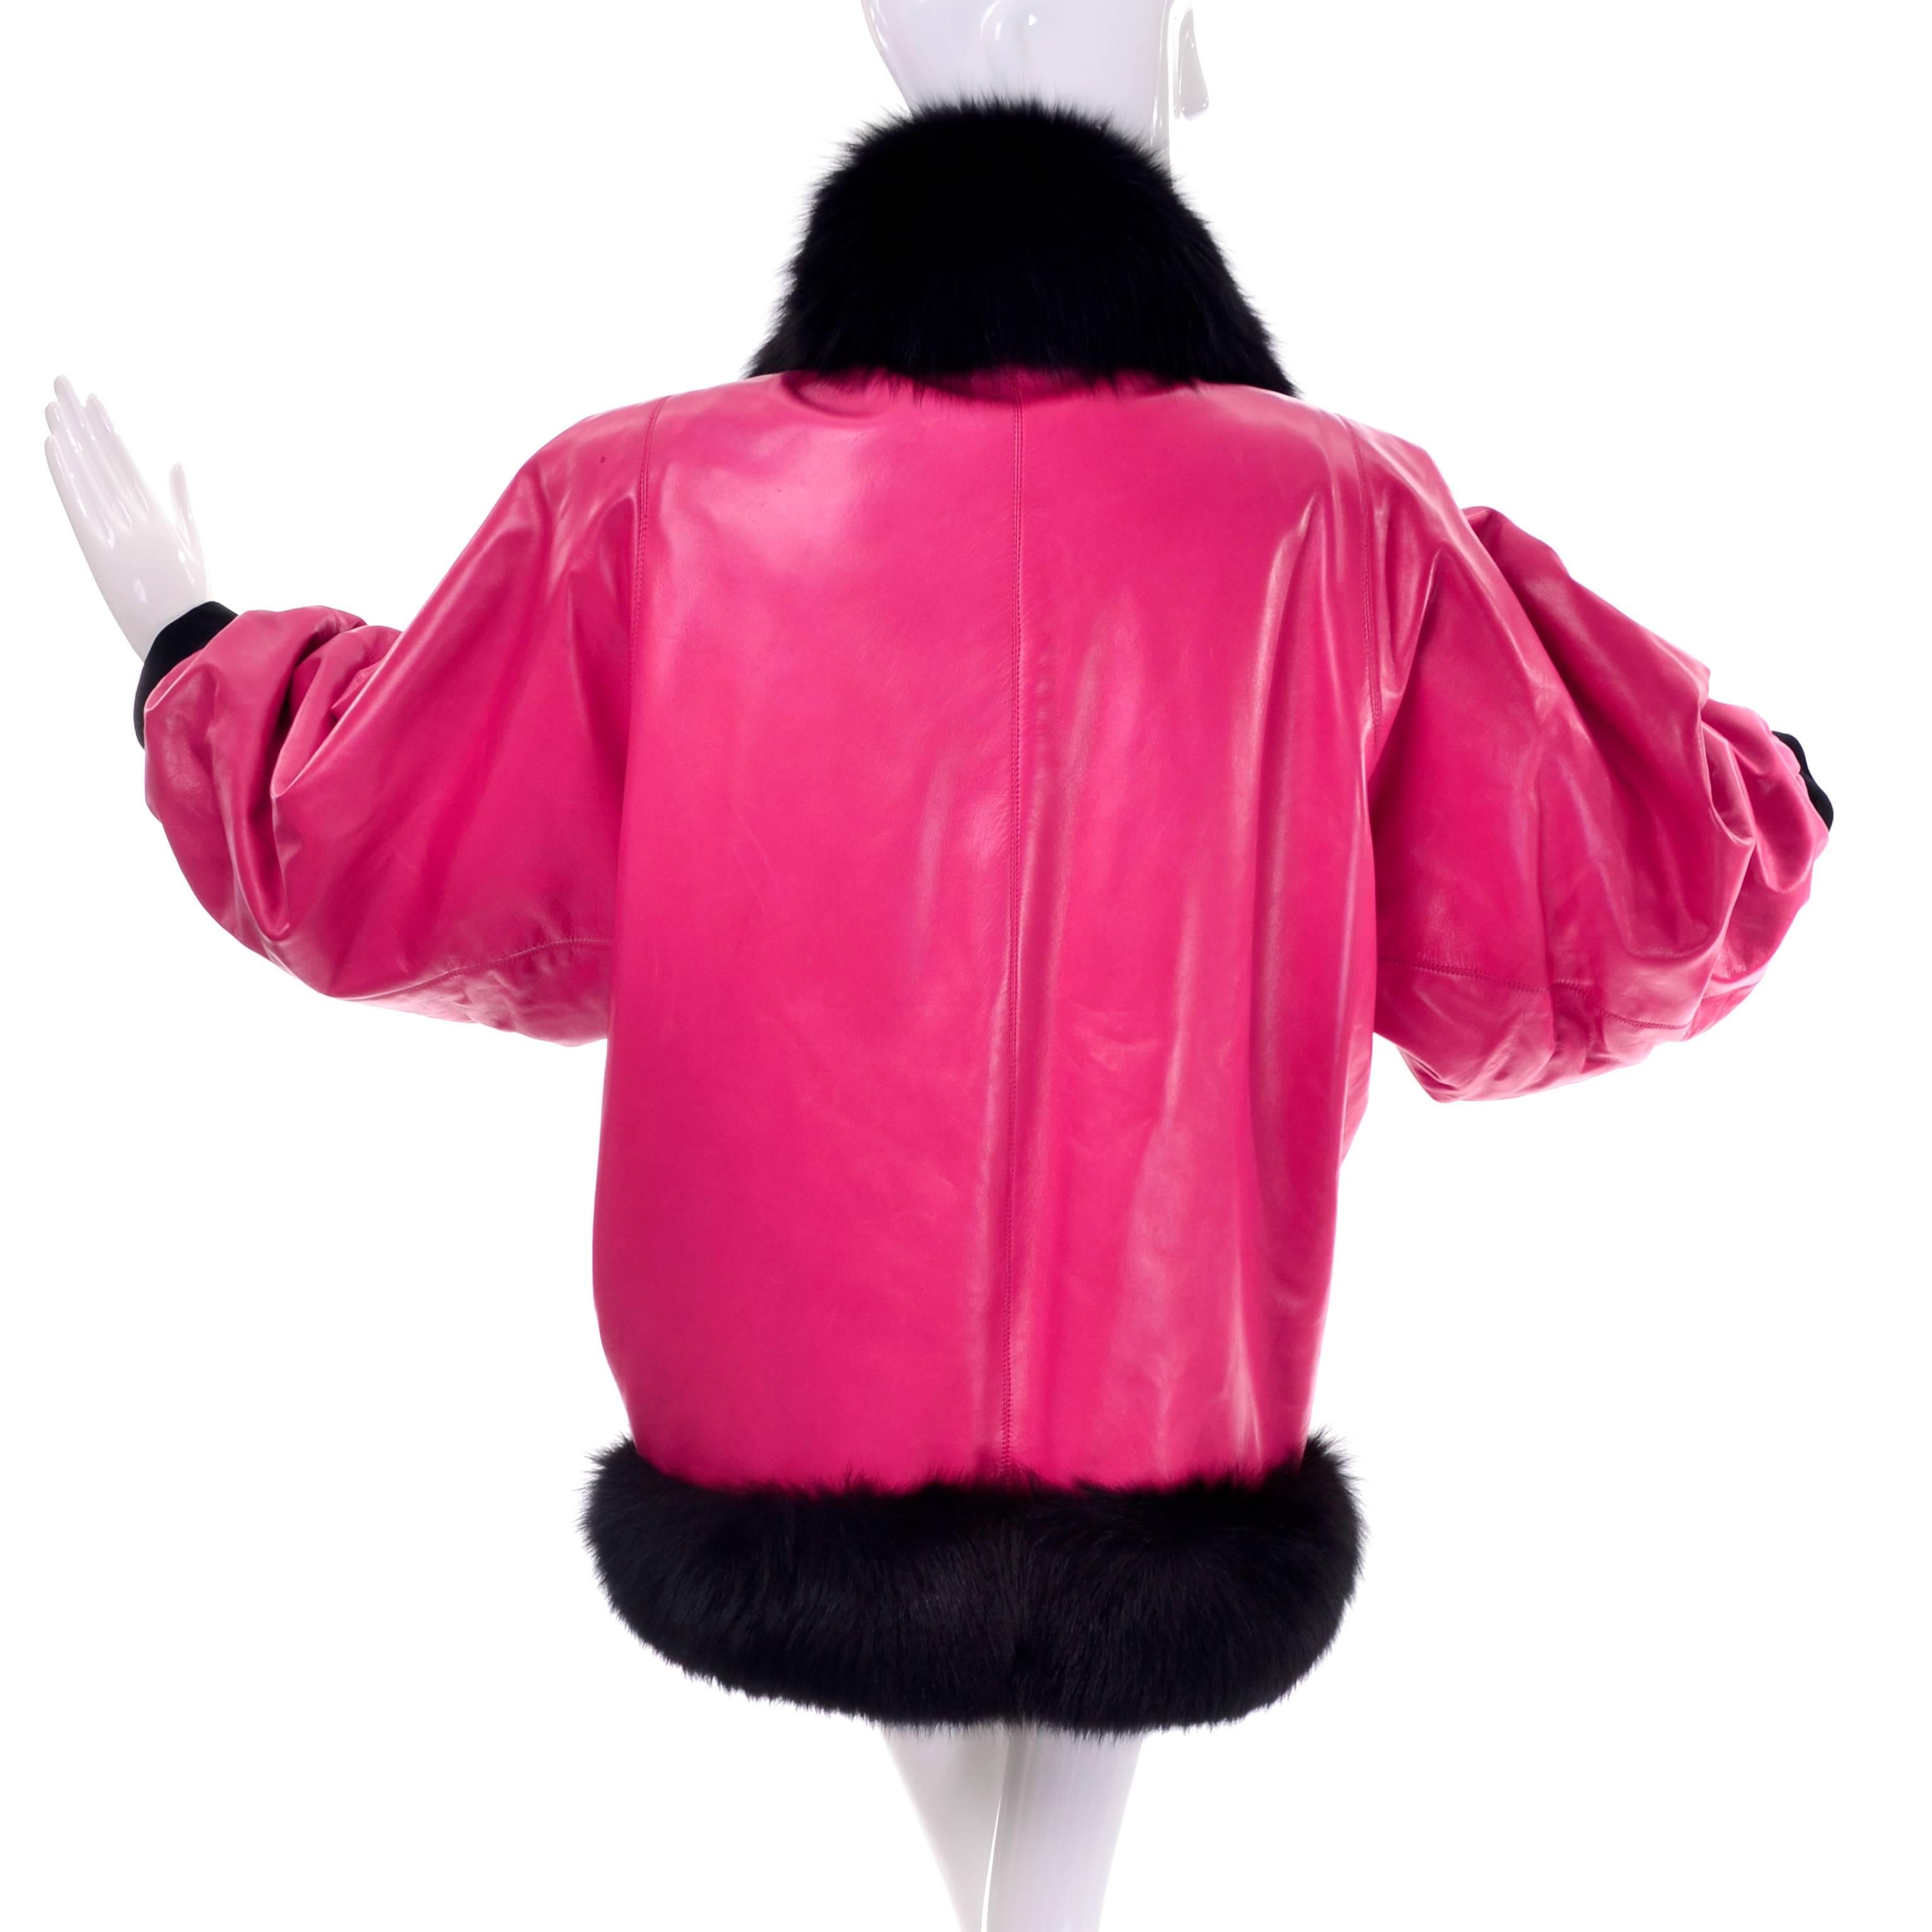 Documented YSL HC 1987/88 Yves Saint Laurent Pink Leather Coat Fur Jacket In Excellent Condition In Portland, OR